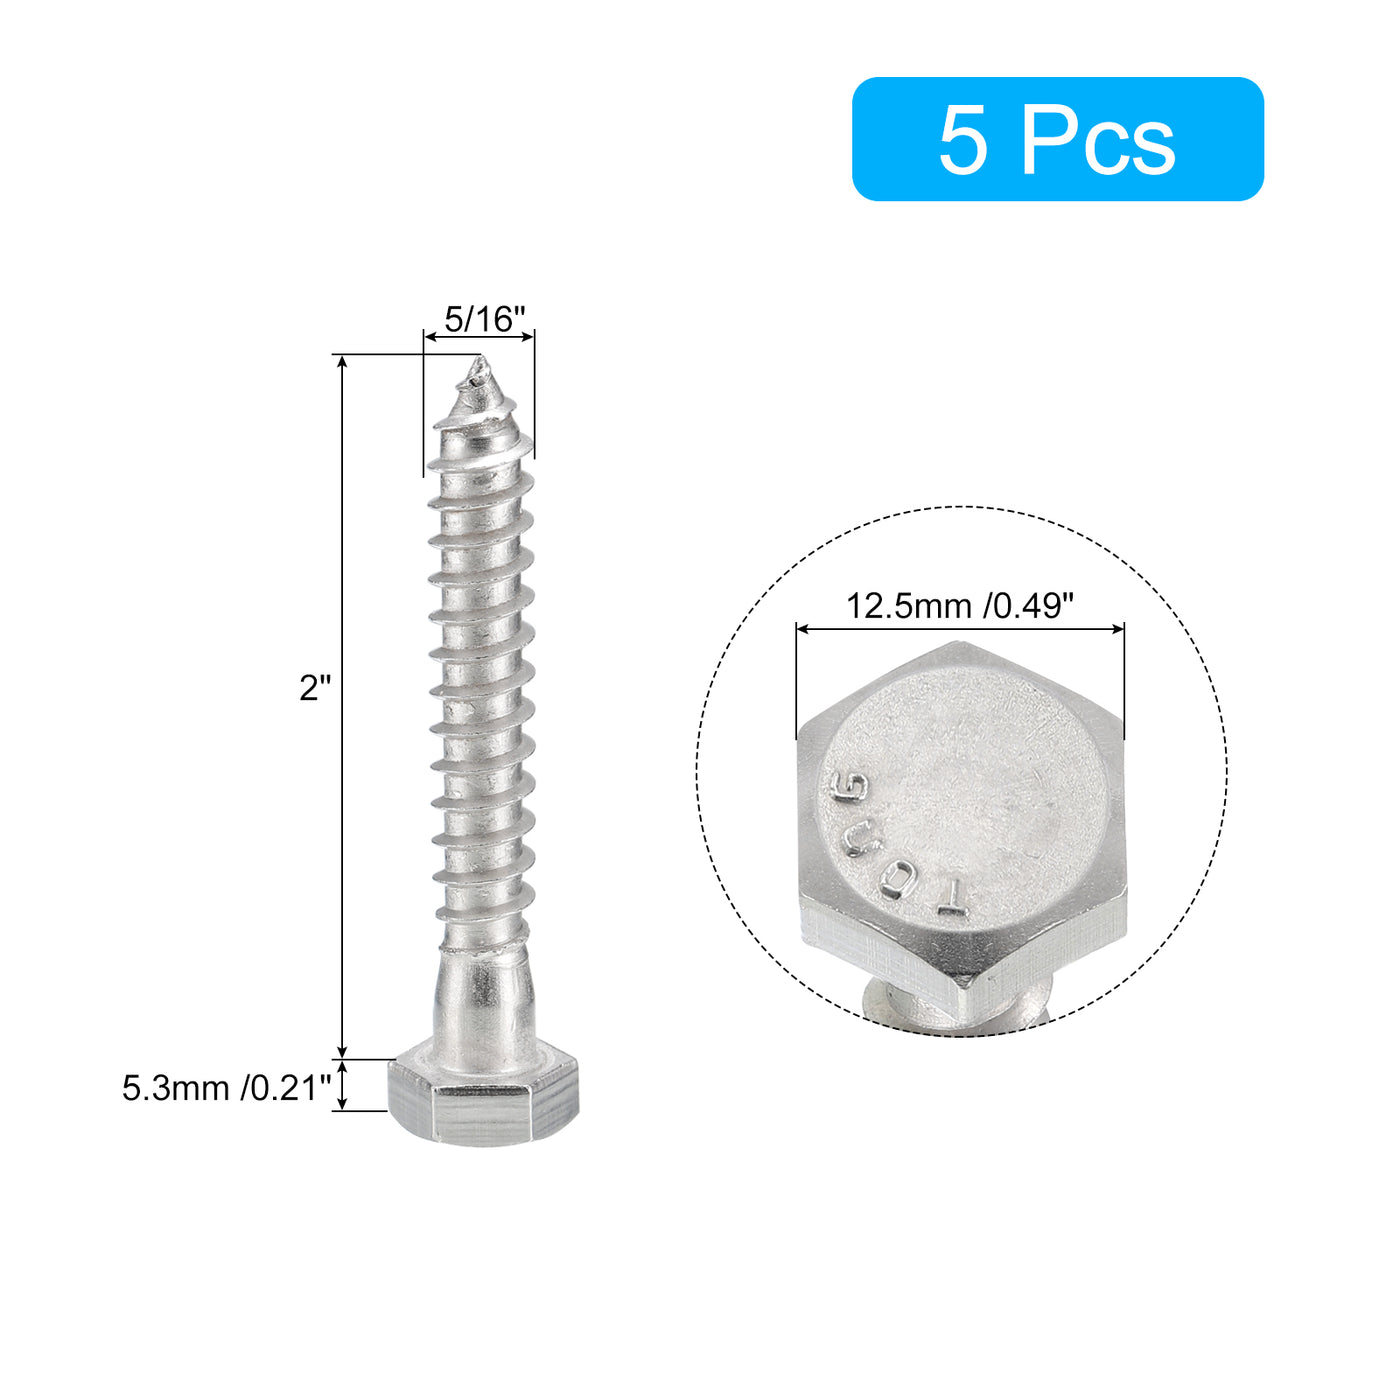 uxcell Uxcell Hex Head Lag Screws Bolts, 5pcs 5/16" x 2" 304 Stainless Steel Wood Screws